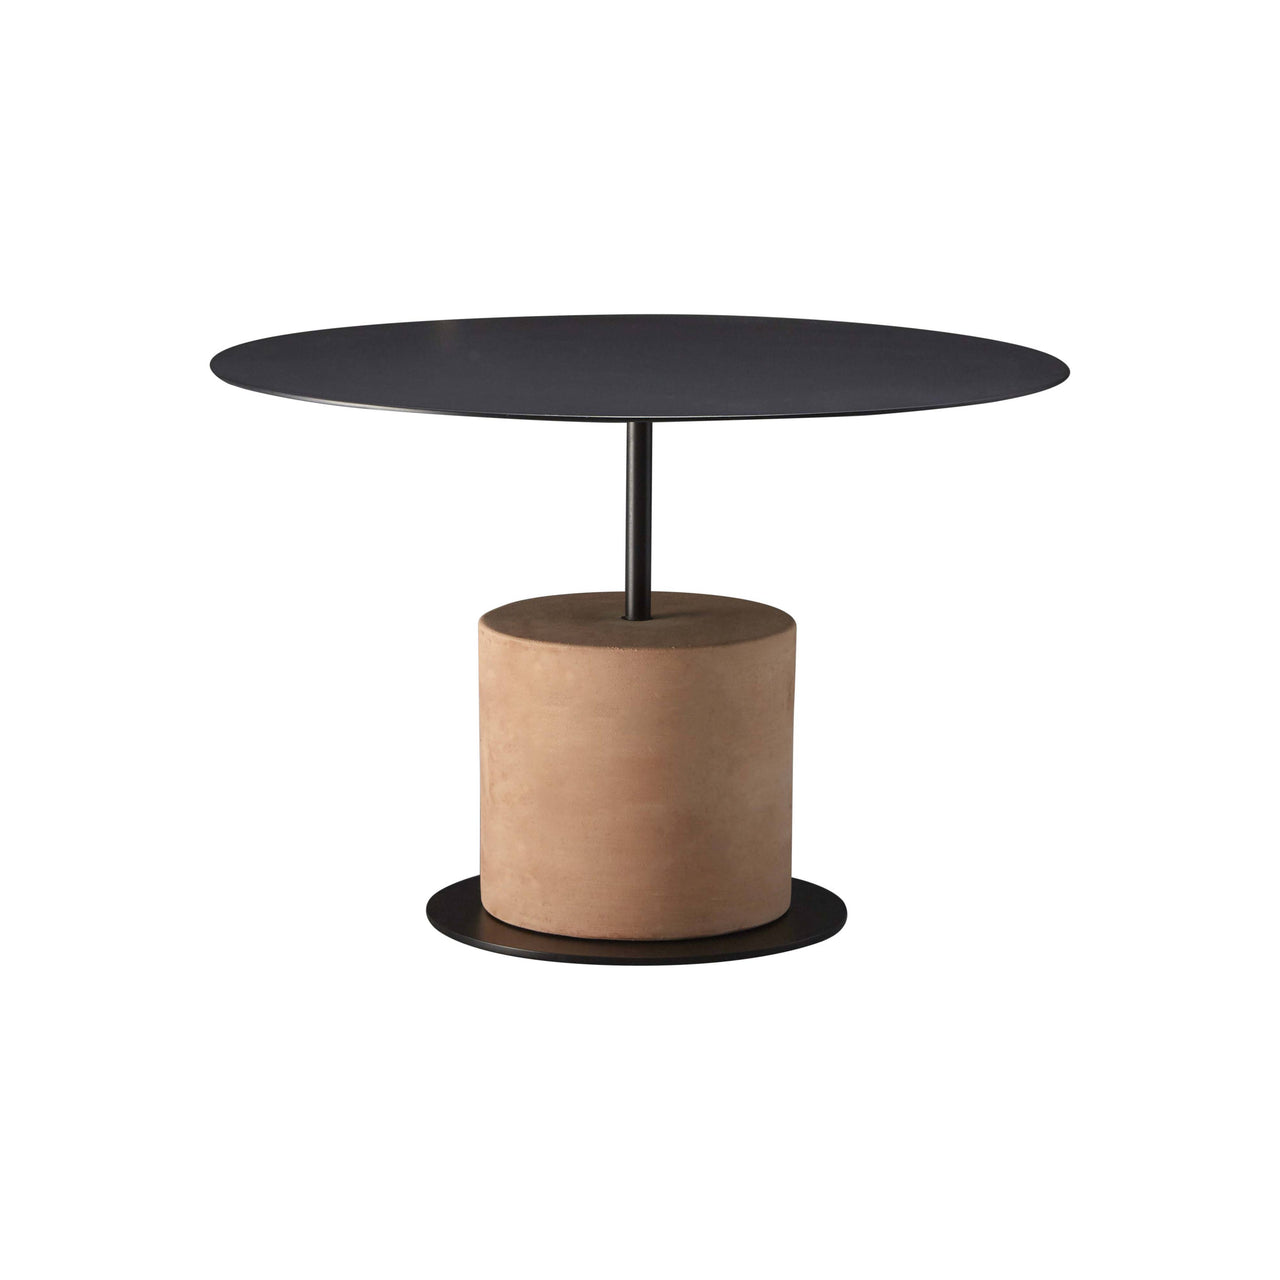 Louie Side Table: Large - 23.6